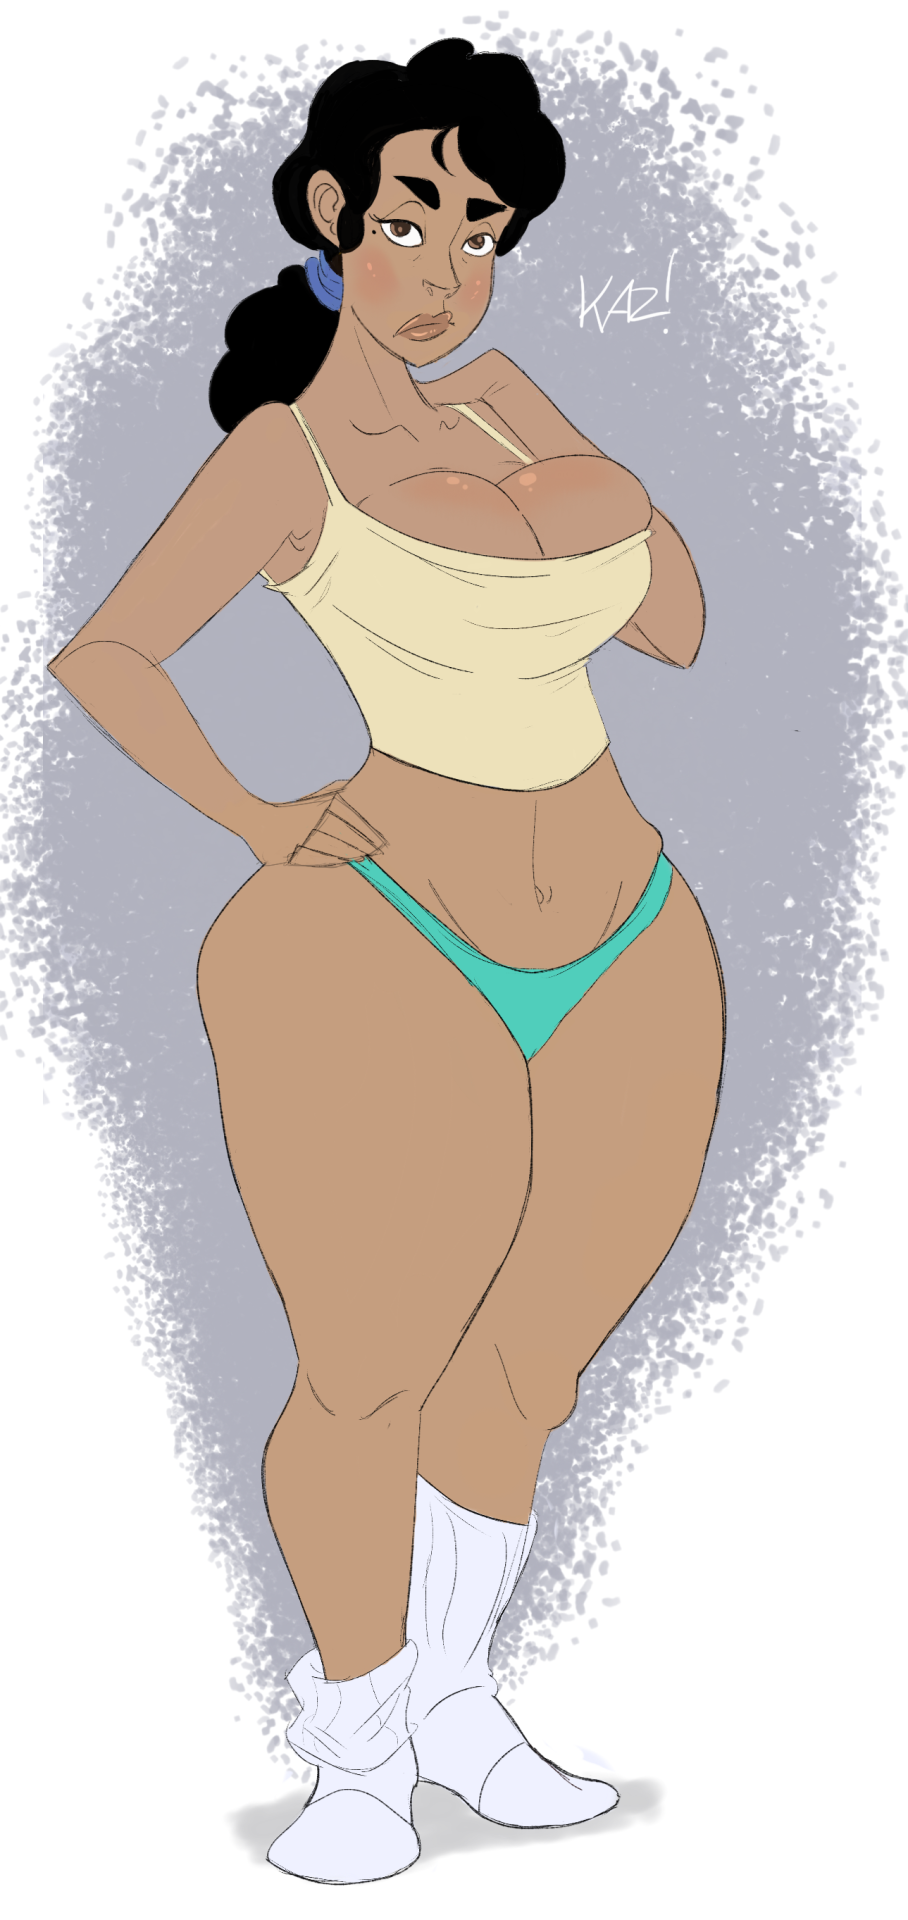 kazzroyale: Happy New Years!  Here… Have some lovely Lani…. Sketch of a new